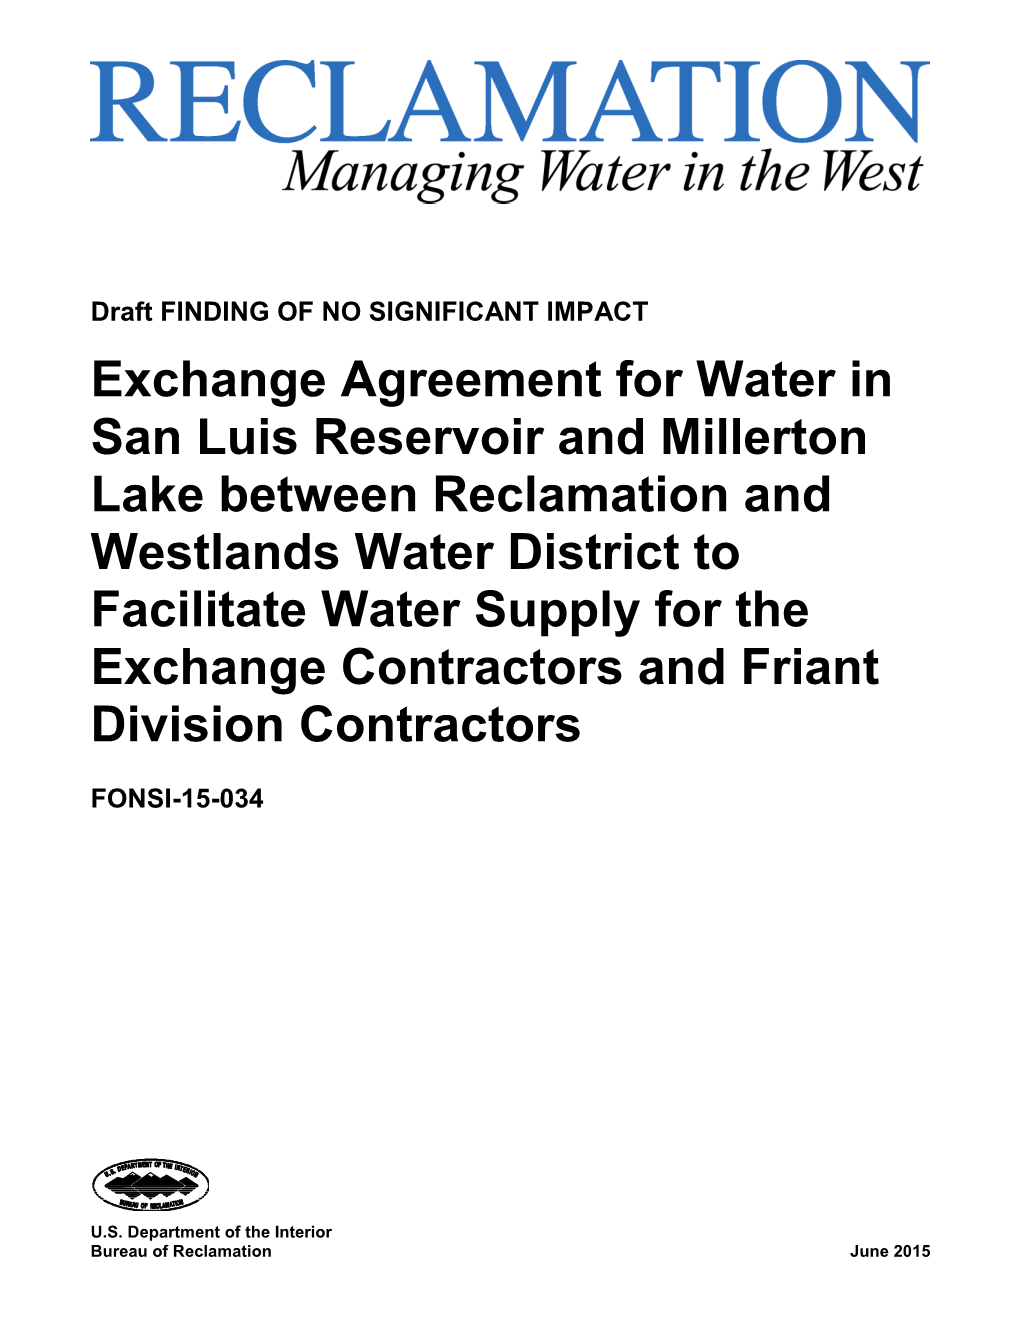 Exchange Agreement for Water in San Luis Reservoir and Millerton Lake Between Reclamation and Westlands Water District to Facili